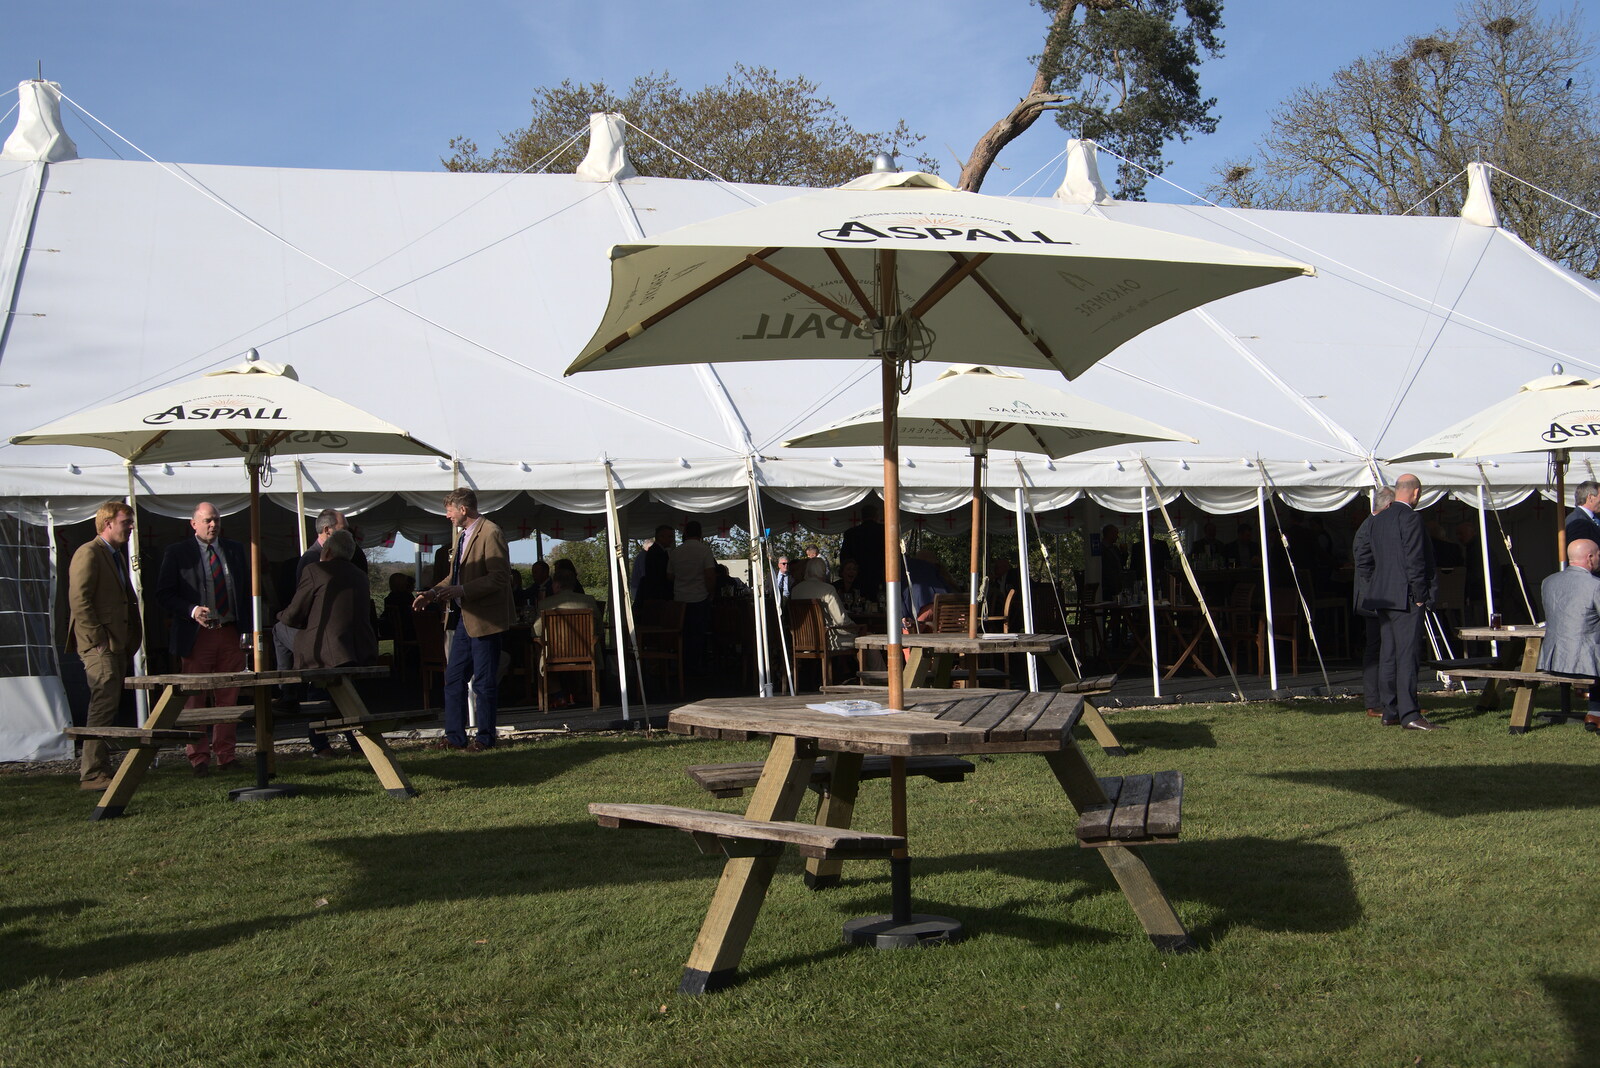 The Oaksmere's marquee from BSCC Beer Garden Hypothermia, Hoxne and Brome, Suffolk - 22nd April 2021